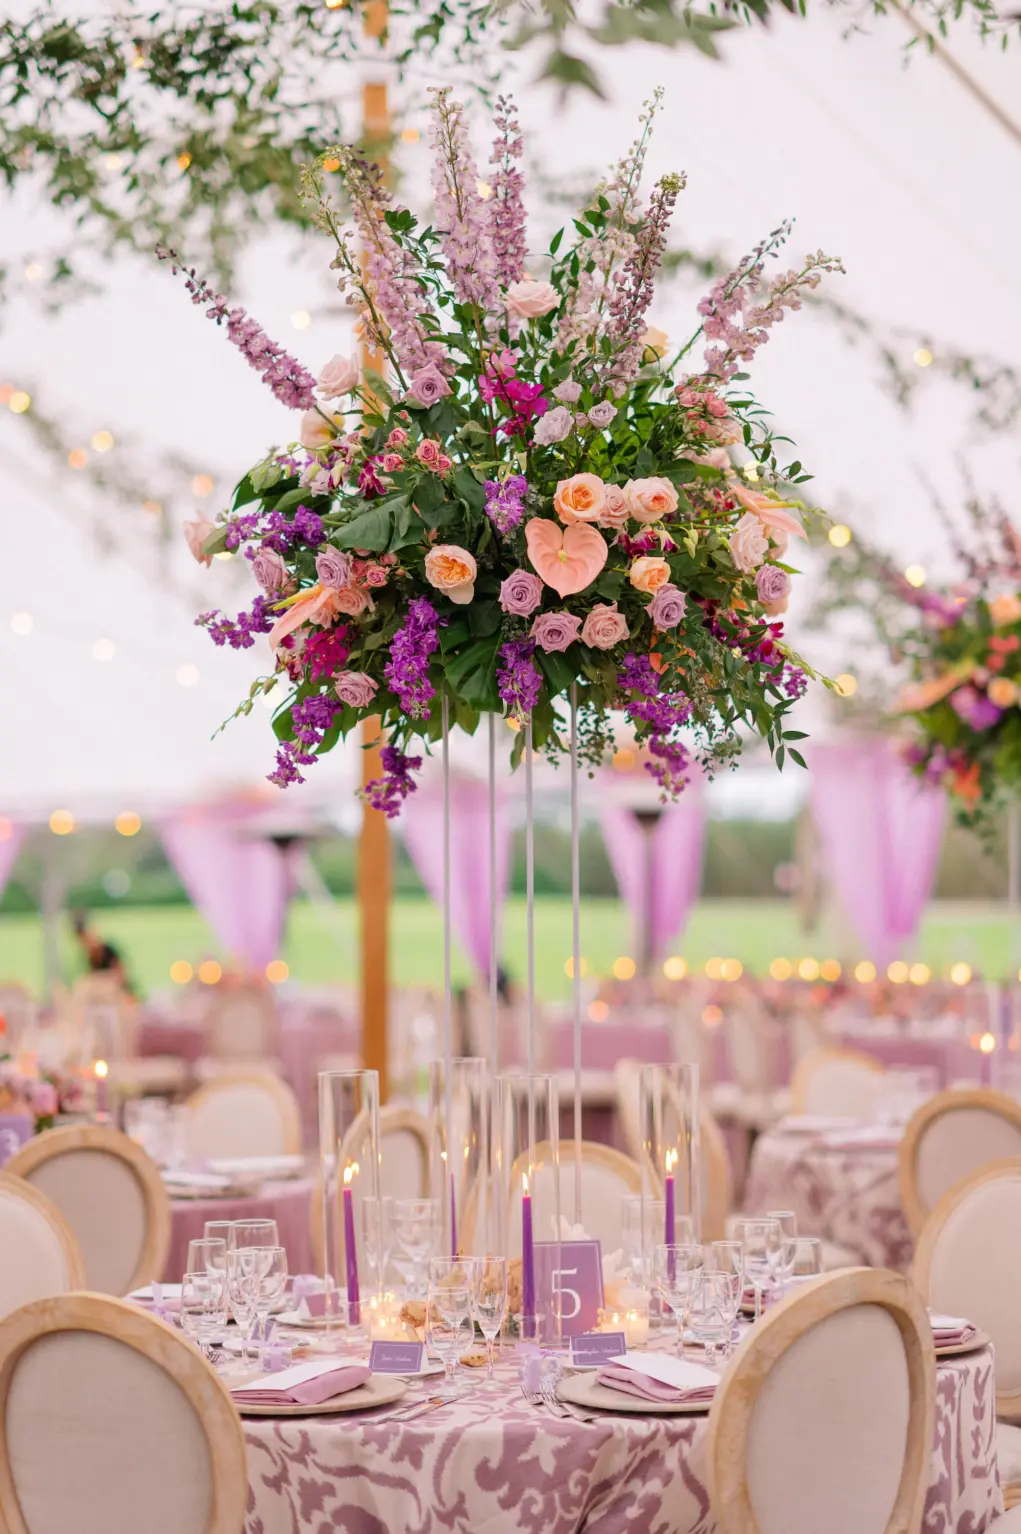 Tall Flower Stand with Purple and Orange Roses, Stock Flowers and Greenery Wedding Reception Centerpieces | Sarasota Florist Botanica Design Studio